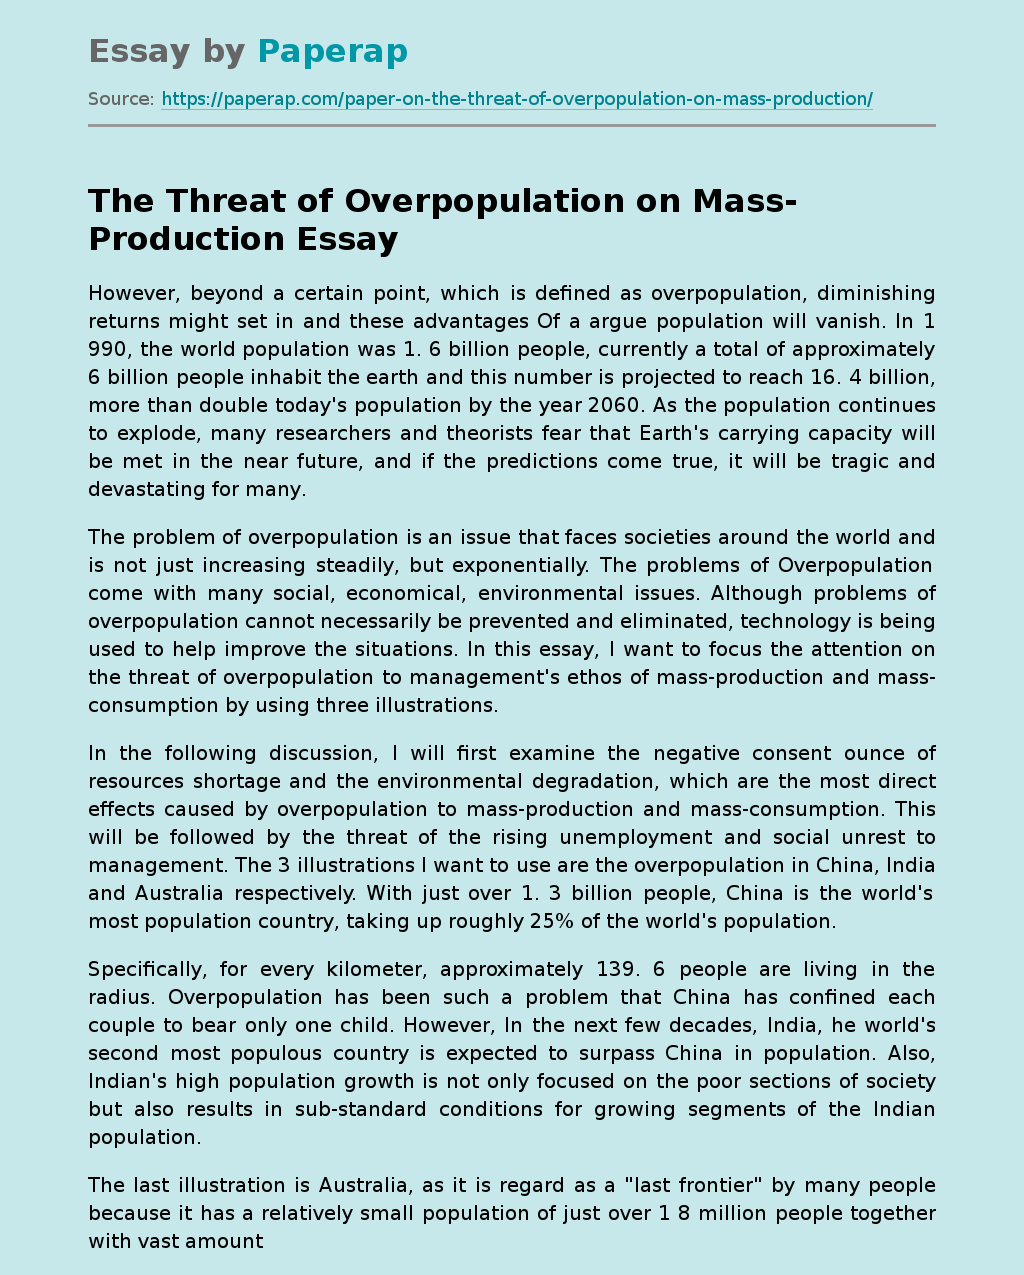 The Threat of Overpopulation on Mass-Production